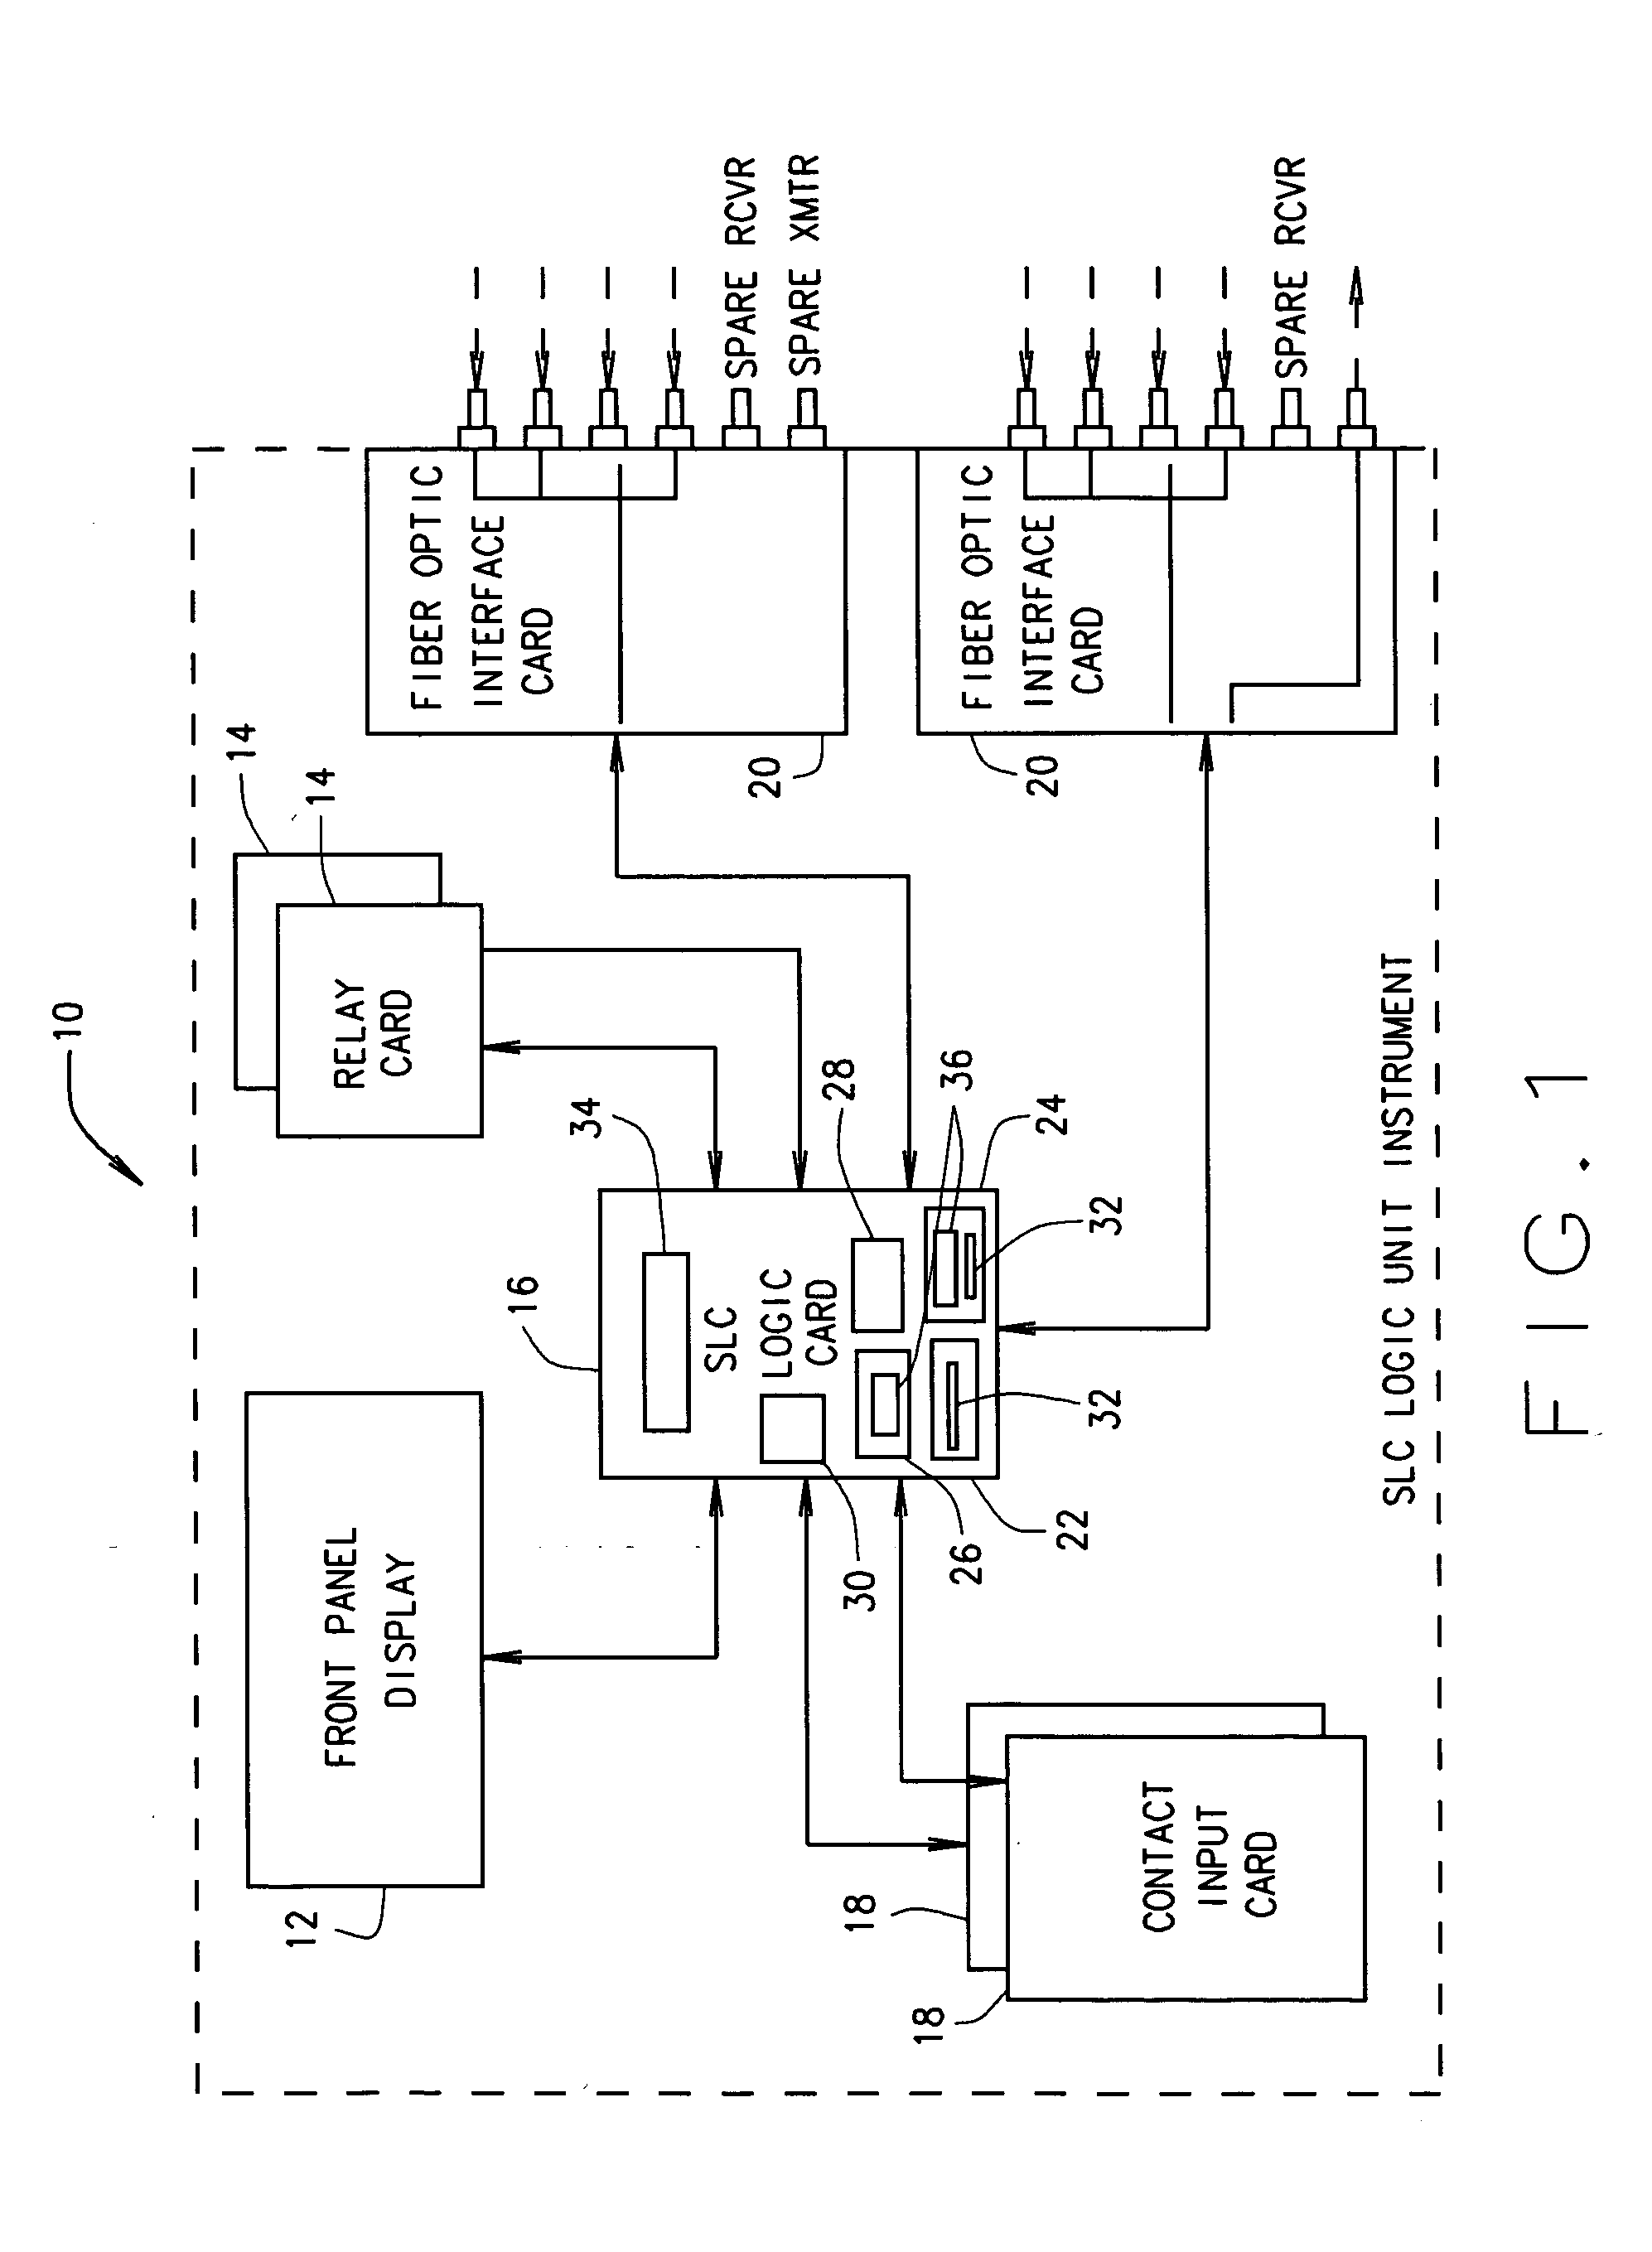 Software based control system for nuclear reactor standby liquid control (SLC) logic processor